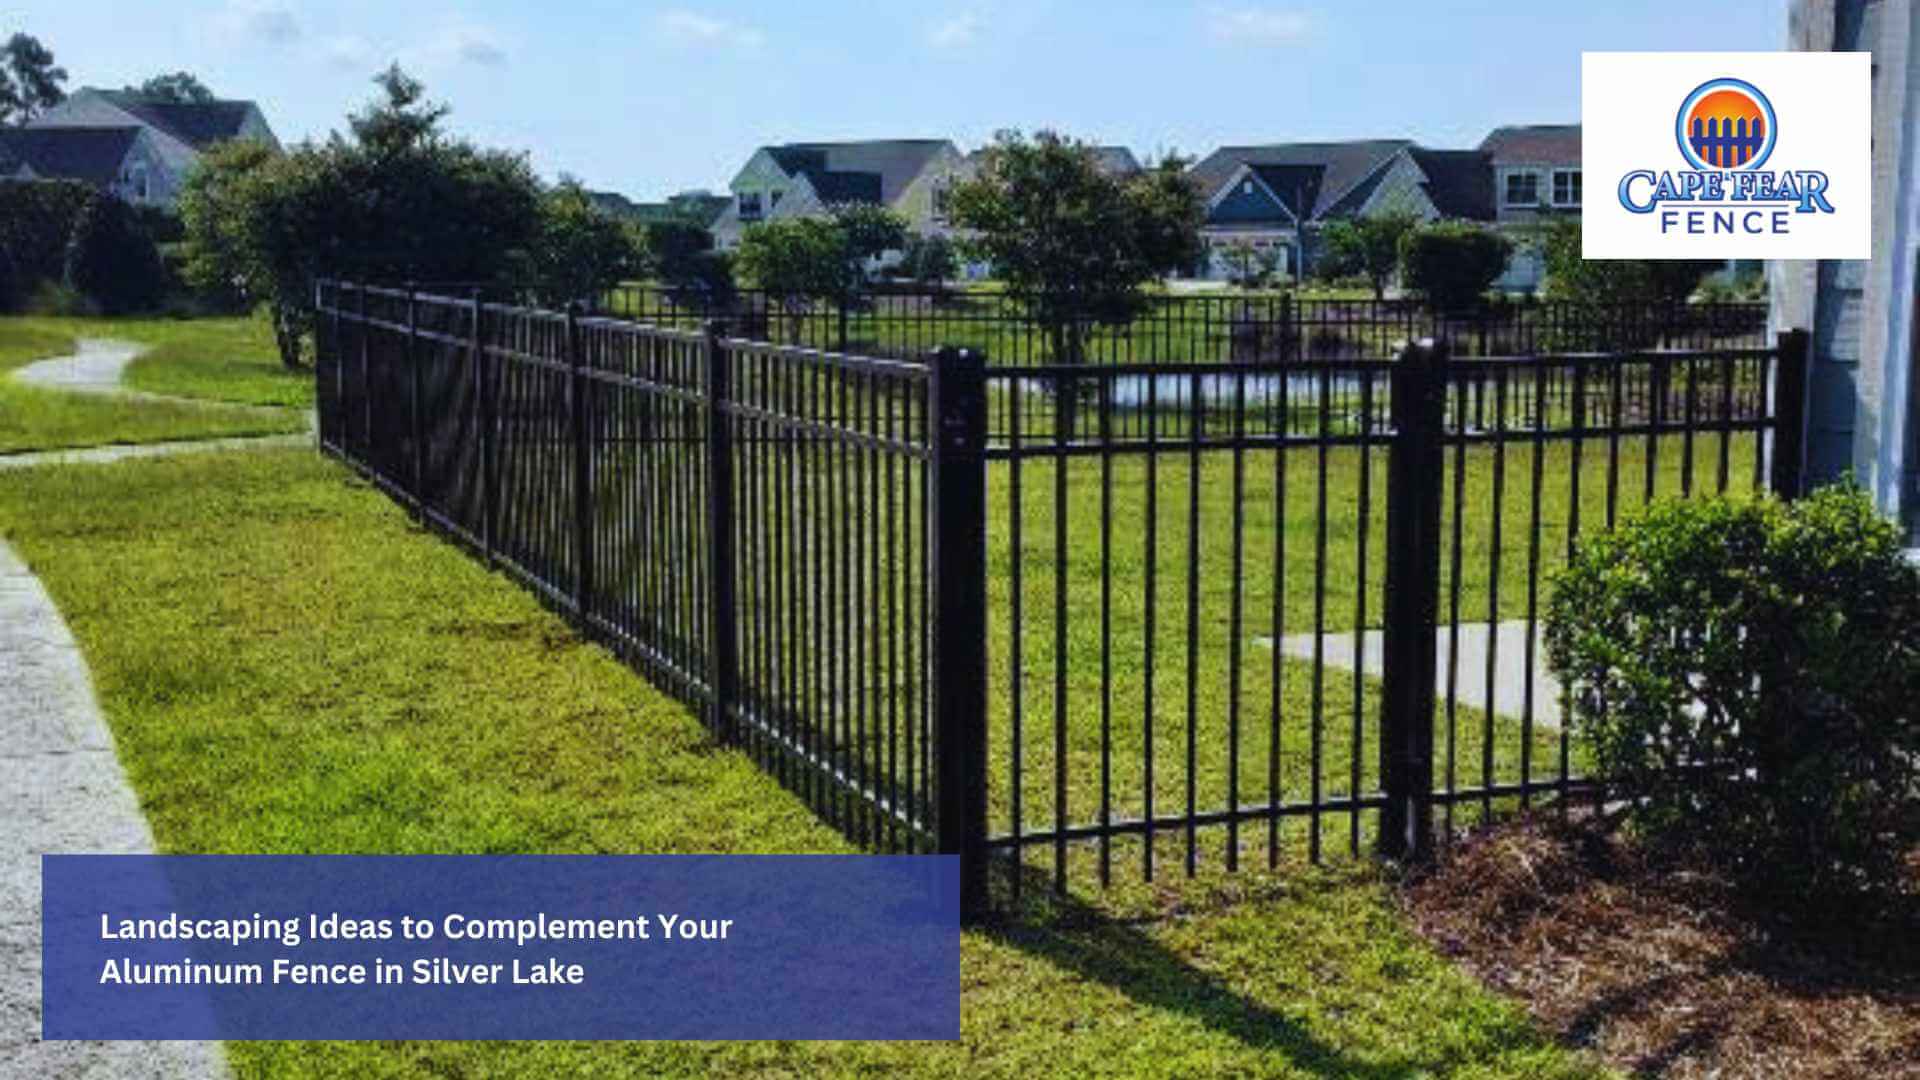 Landscaping Ideas to Complement Your Aluminum Fence in Silver Lake